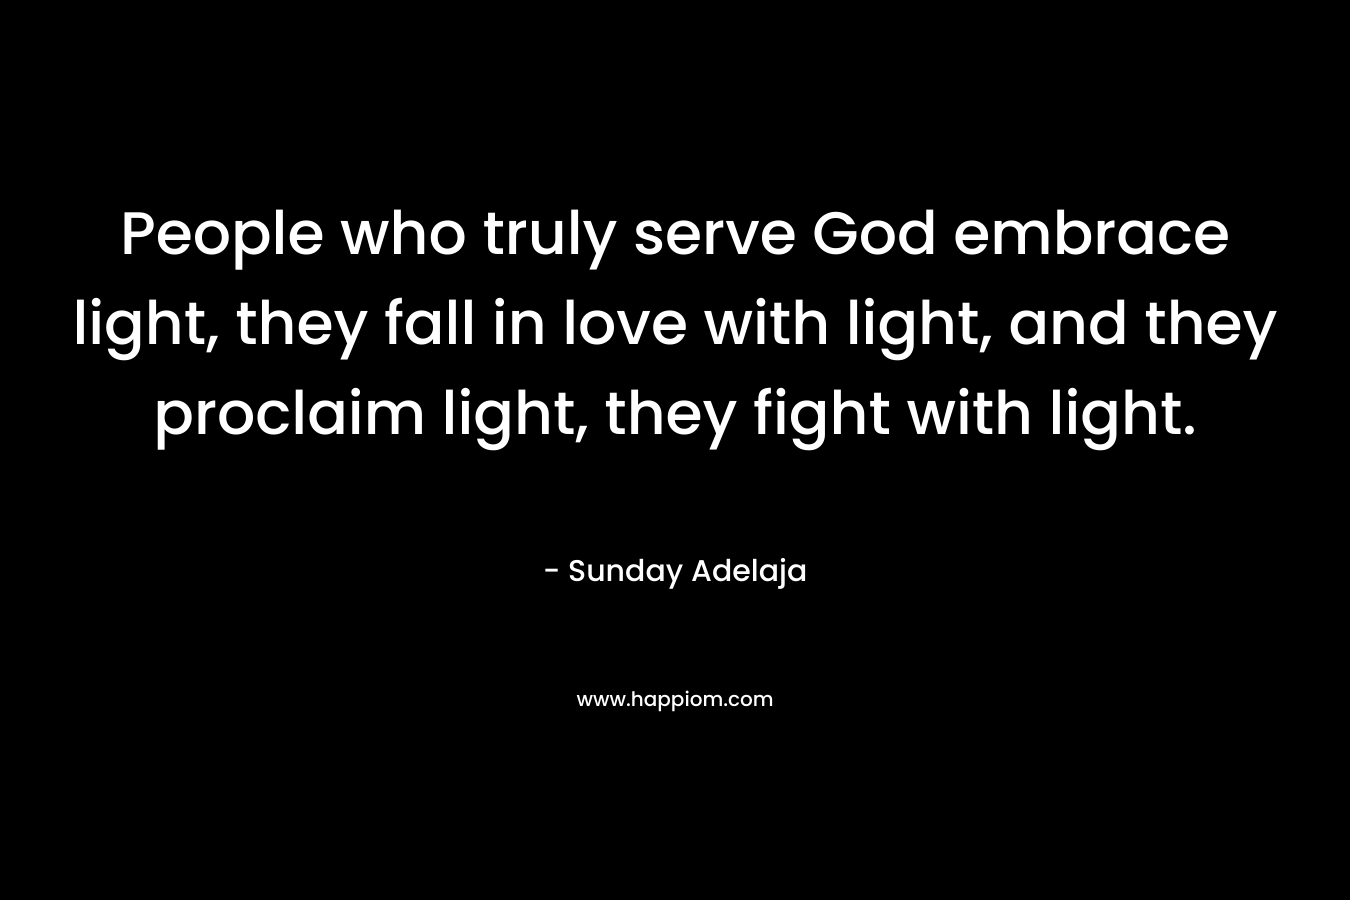 People who truly serve God embrace light, they fall in love with light, and they proclaim light, they fight with light.